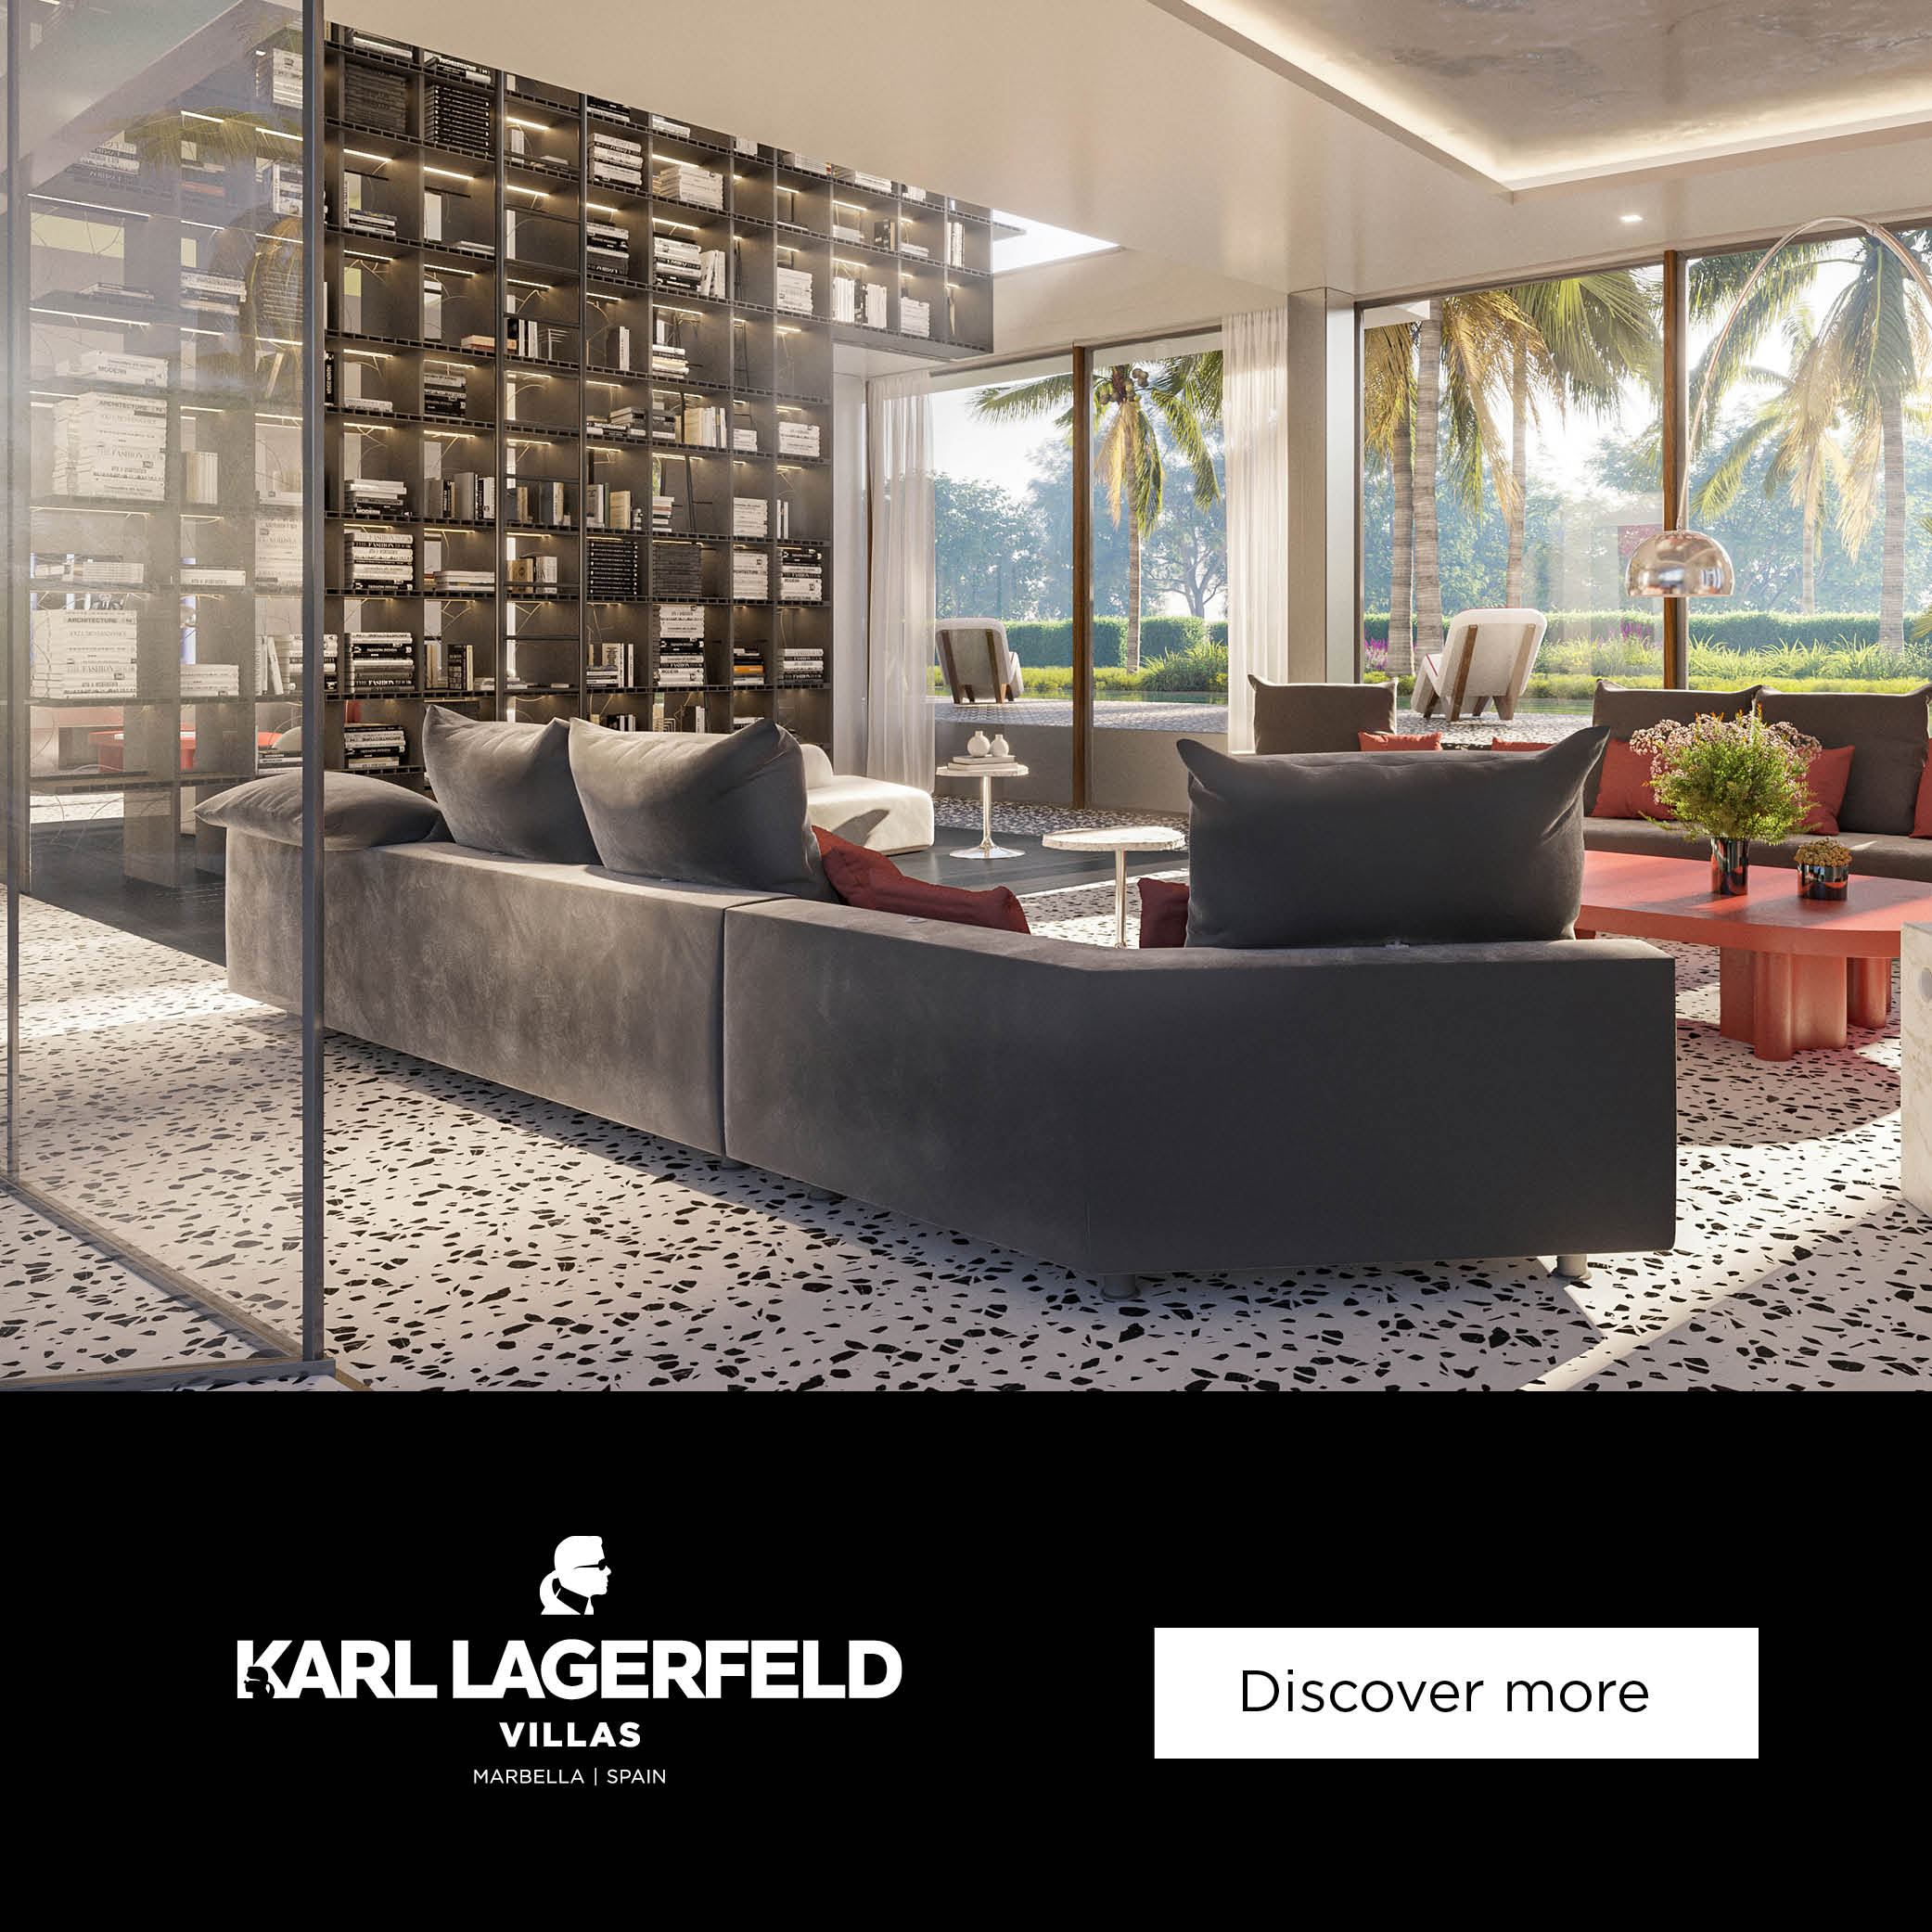 Five exclusive homes, perfectly integrated into the lush nature of Marbella’s Golden Mile. KARL LAGERFELD VILLAS stems from Karl’s passion for architecture, interior design and constantly pushing the envelope of innovation. The lifestyle-oriented environment harmoniously incorporates the local landscape through elevated architecture and a focus on sustainability.